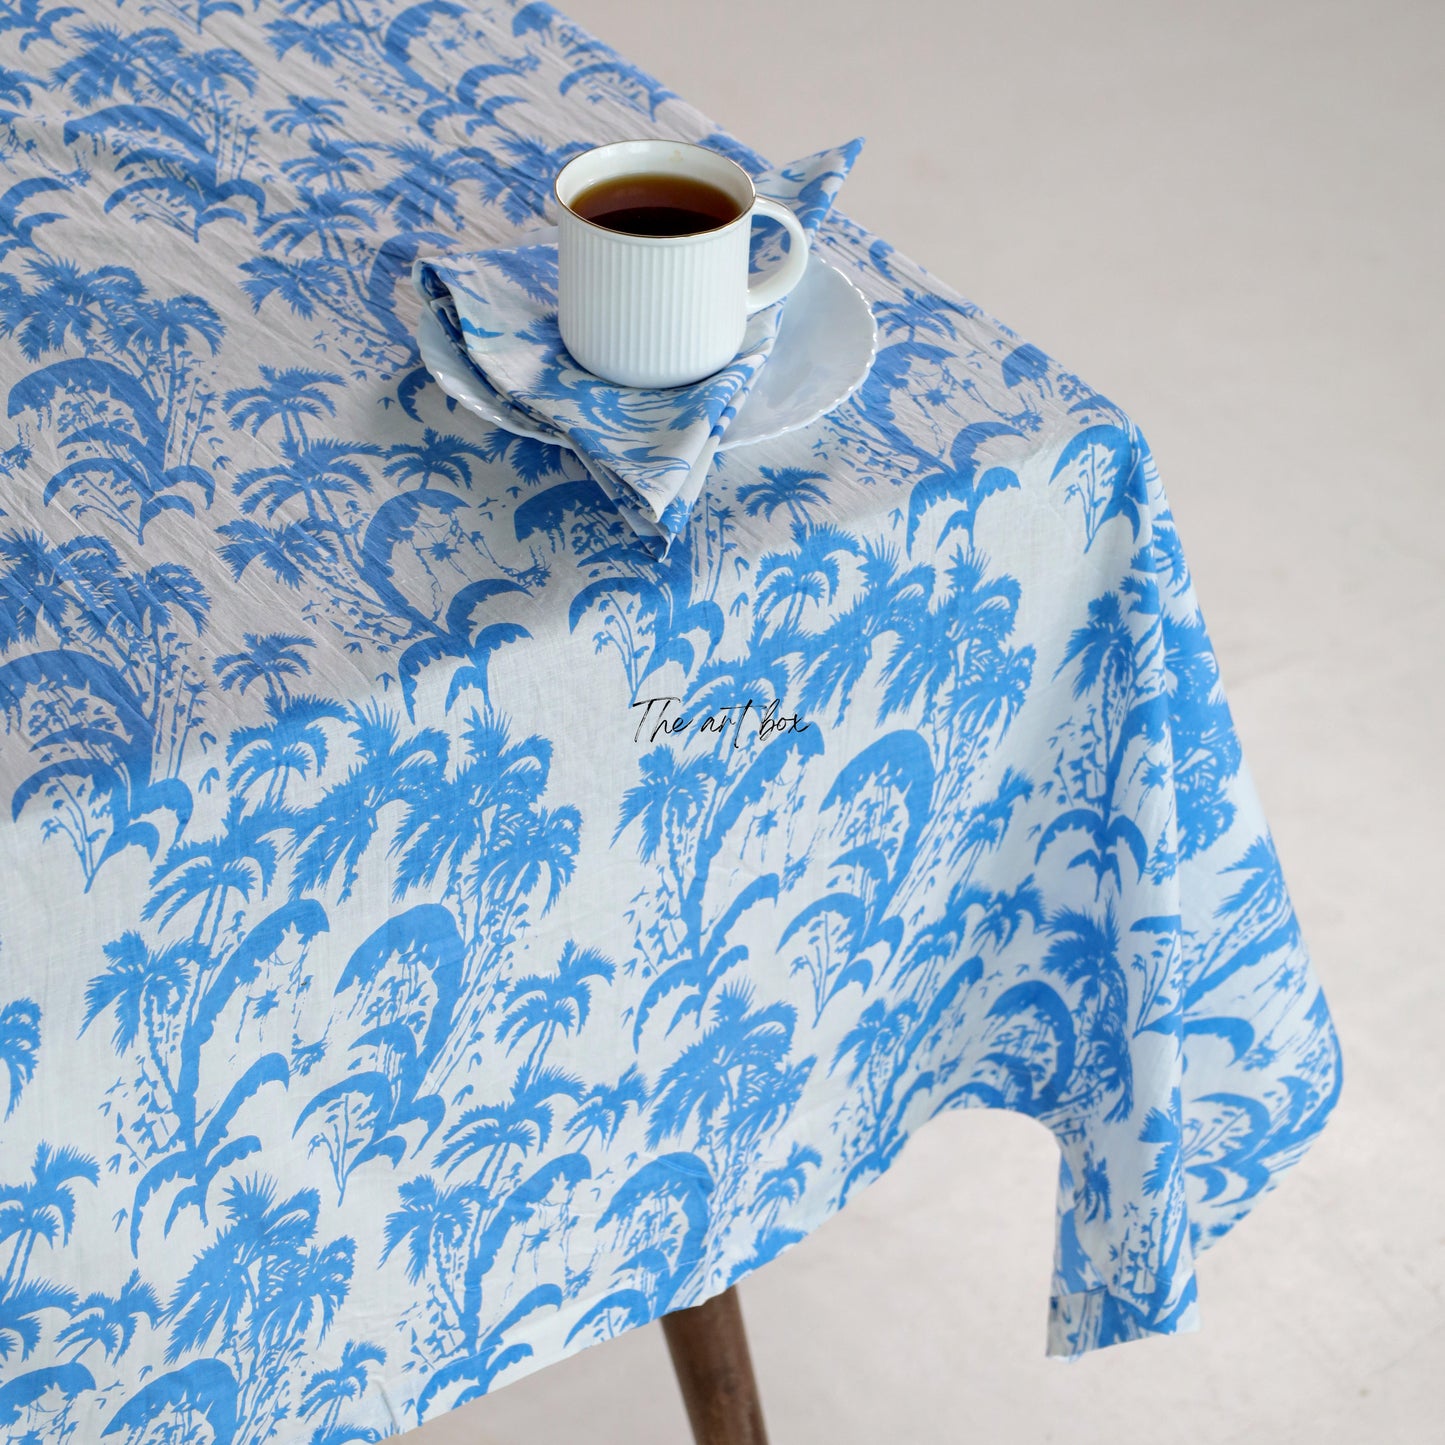 Beauty of Floral Cotton Printed Table Covers for Every Occasion